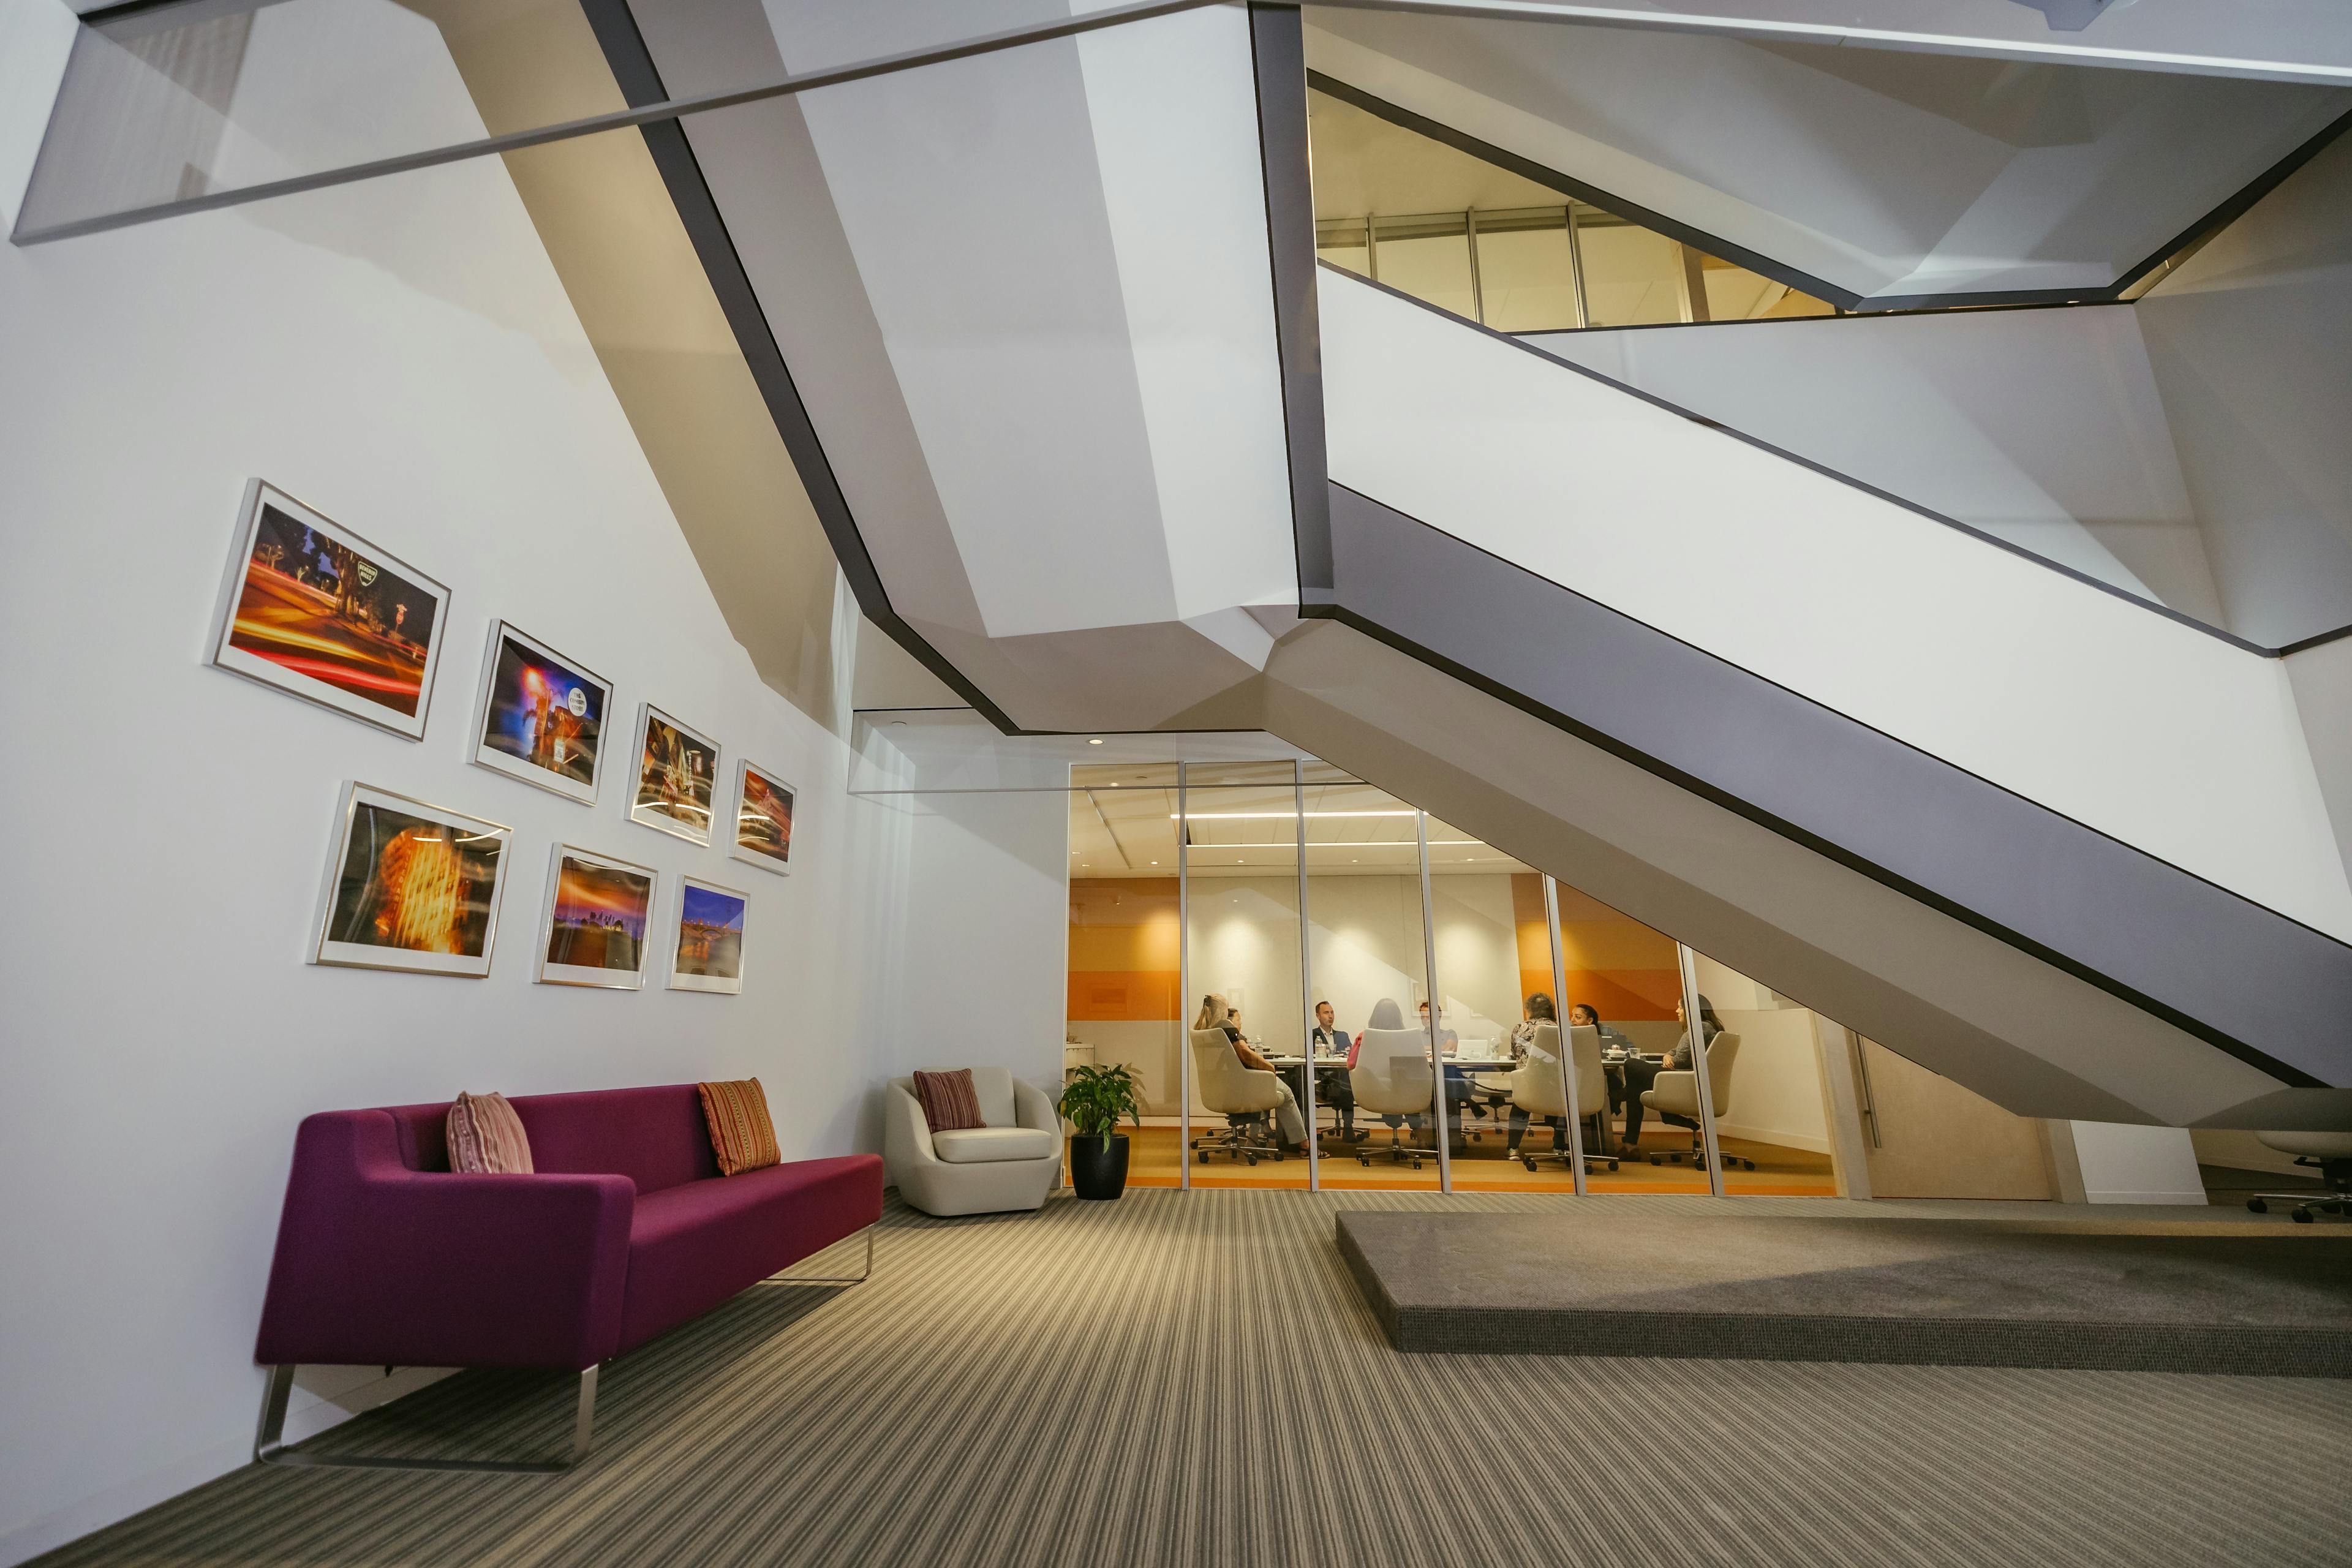 Interior of Nixon Peabody's Los Angeles office; on the left wall is a purple couch, behind which hang 7 framed photographs in two rows; a staircase leads up from right to left; in the background, looking under the staircase suspended above, a conference room can be seen through glass panels with a group of people sitting around an oblong table